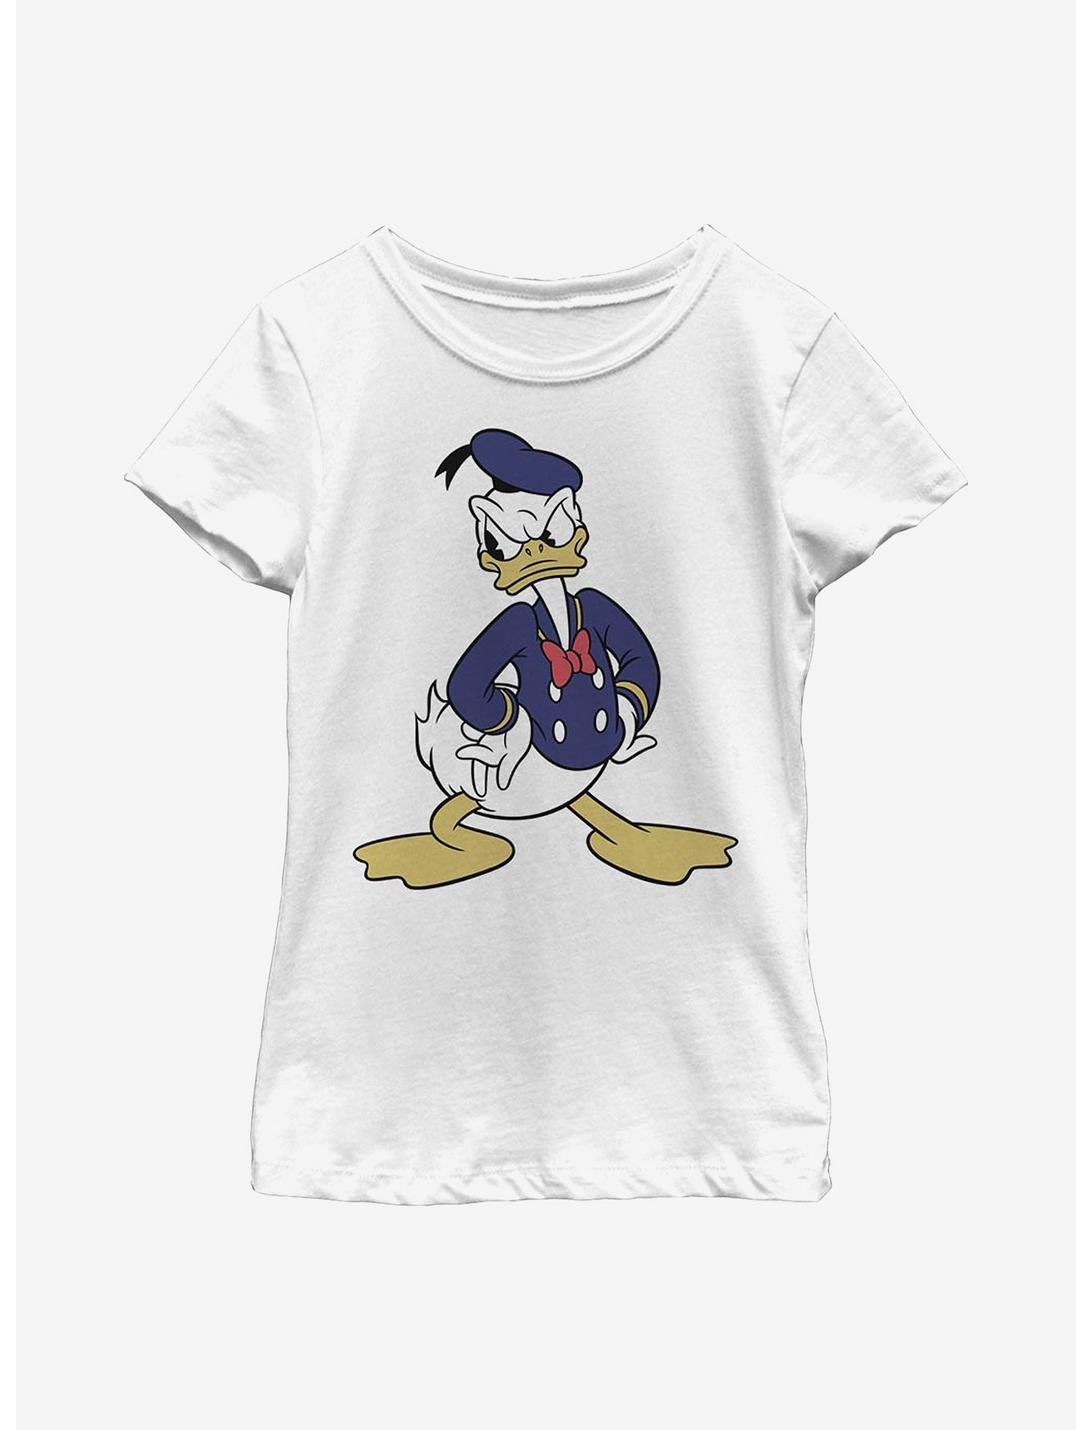 Disney Donald Duck Classic Vintage Donald Youth Girls T-Shirt, WHITE, hi-res